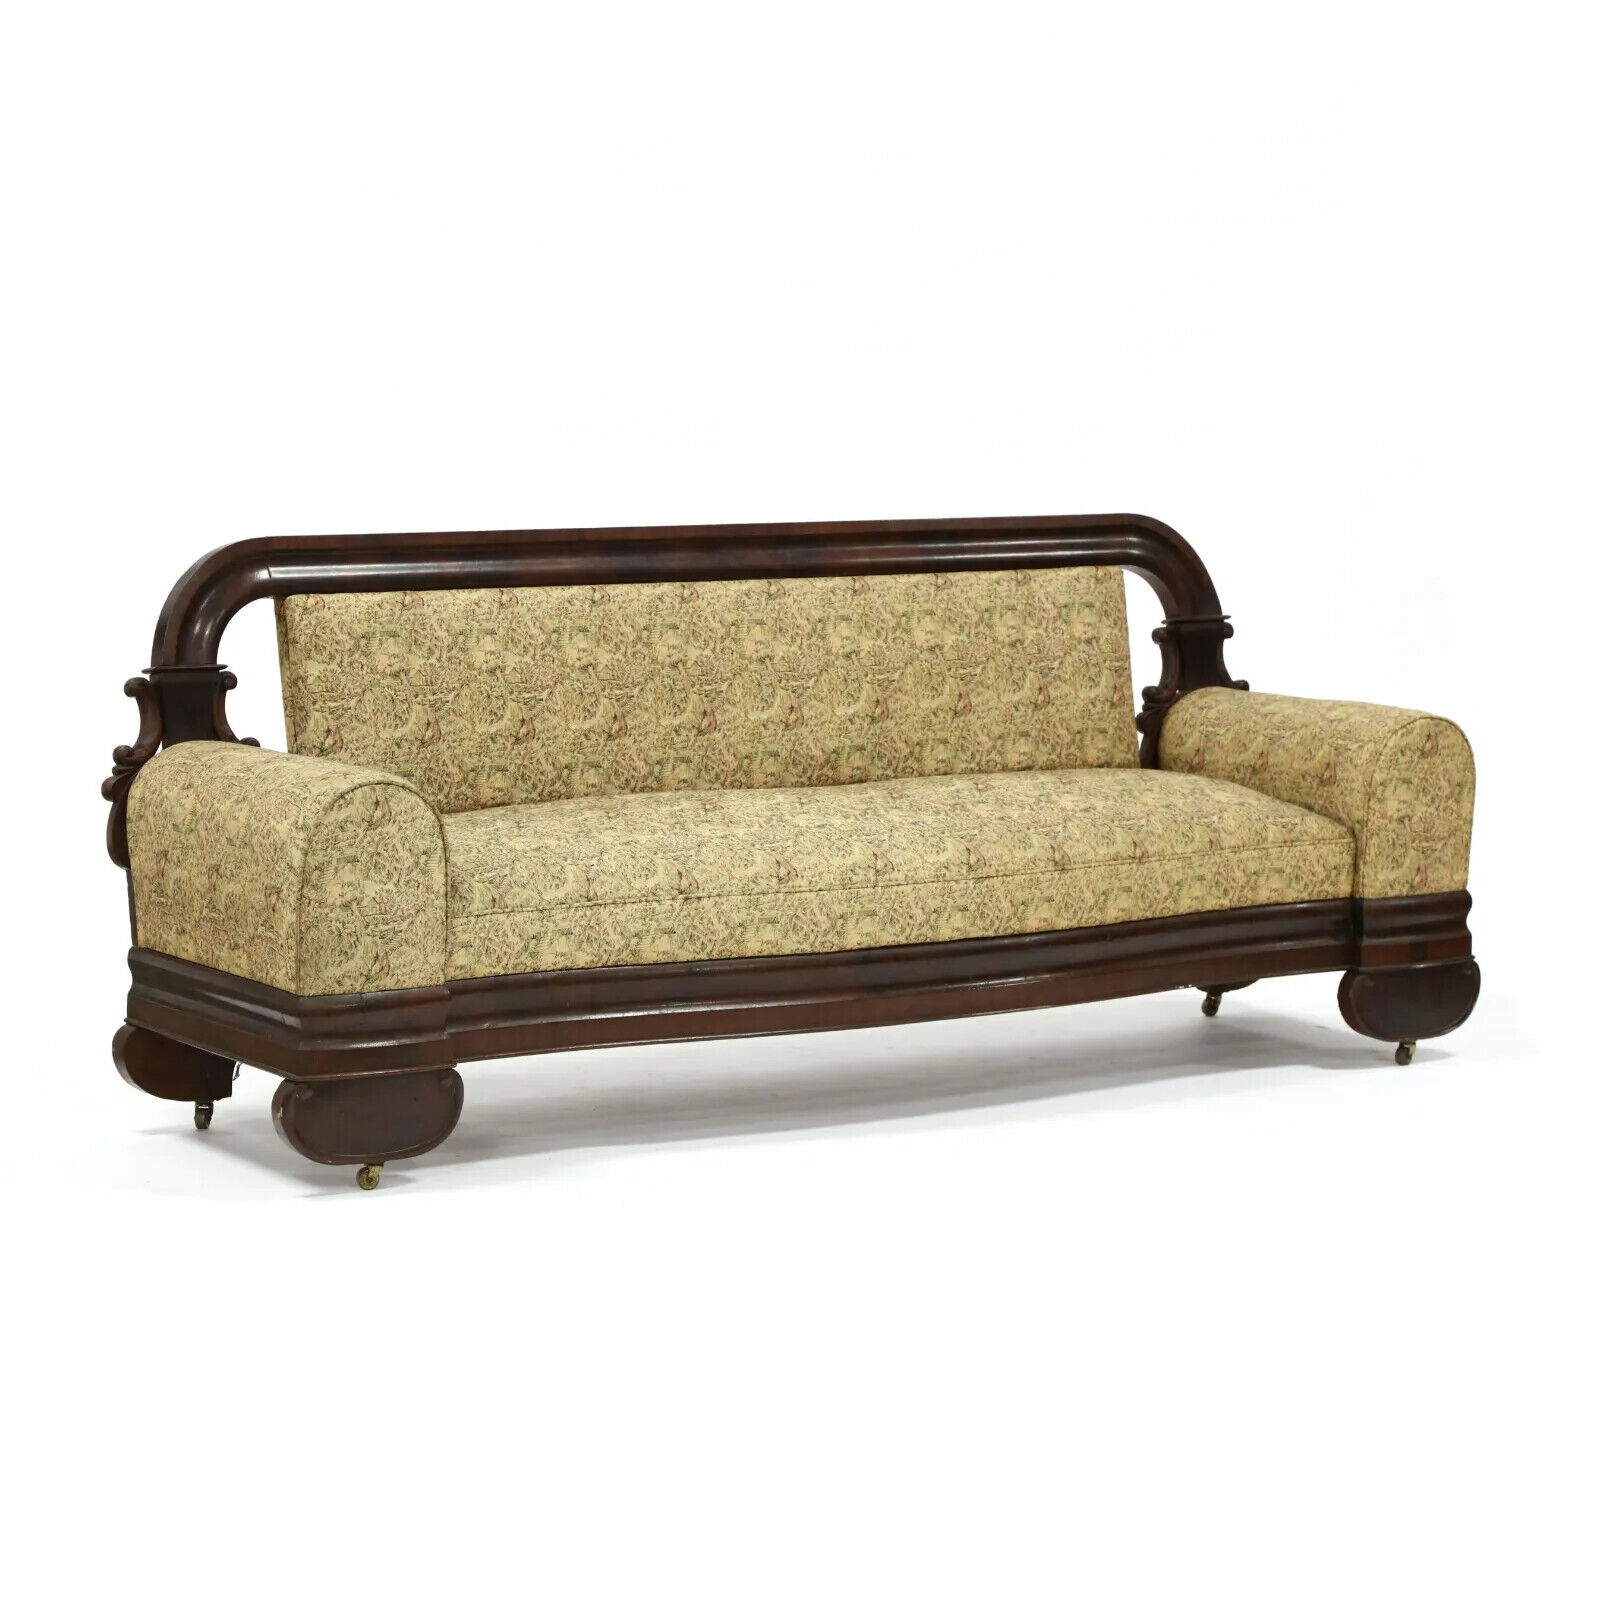 Antique Sofa, American Classical Mahogany, Tapestry Style Upholstery, C. 1840's!